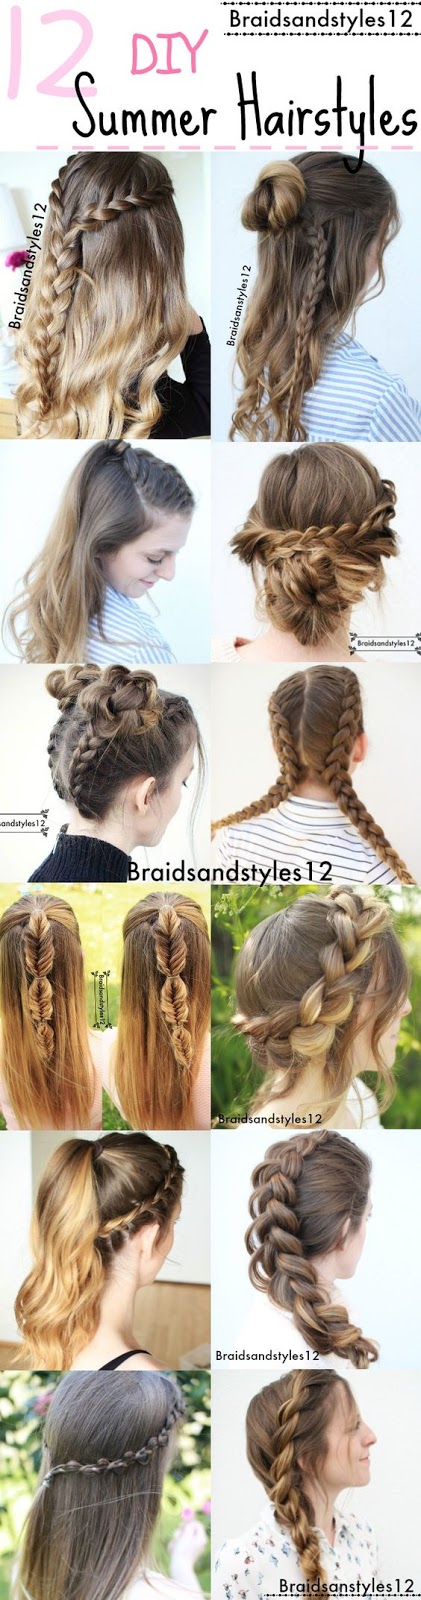 12 braid hairstyle ideas for this summer